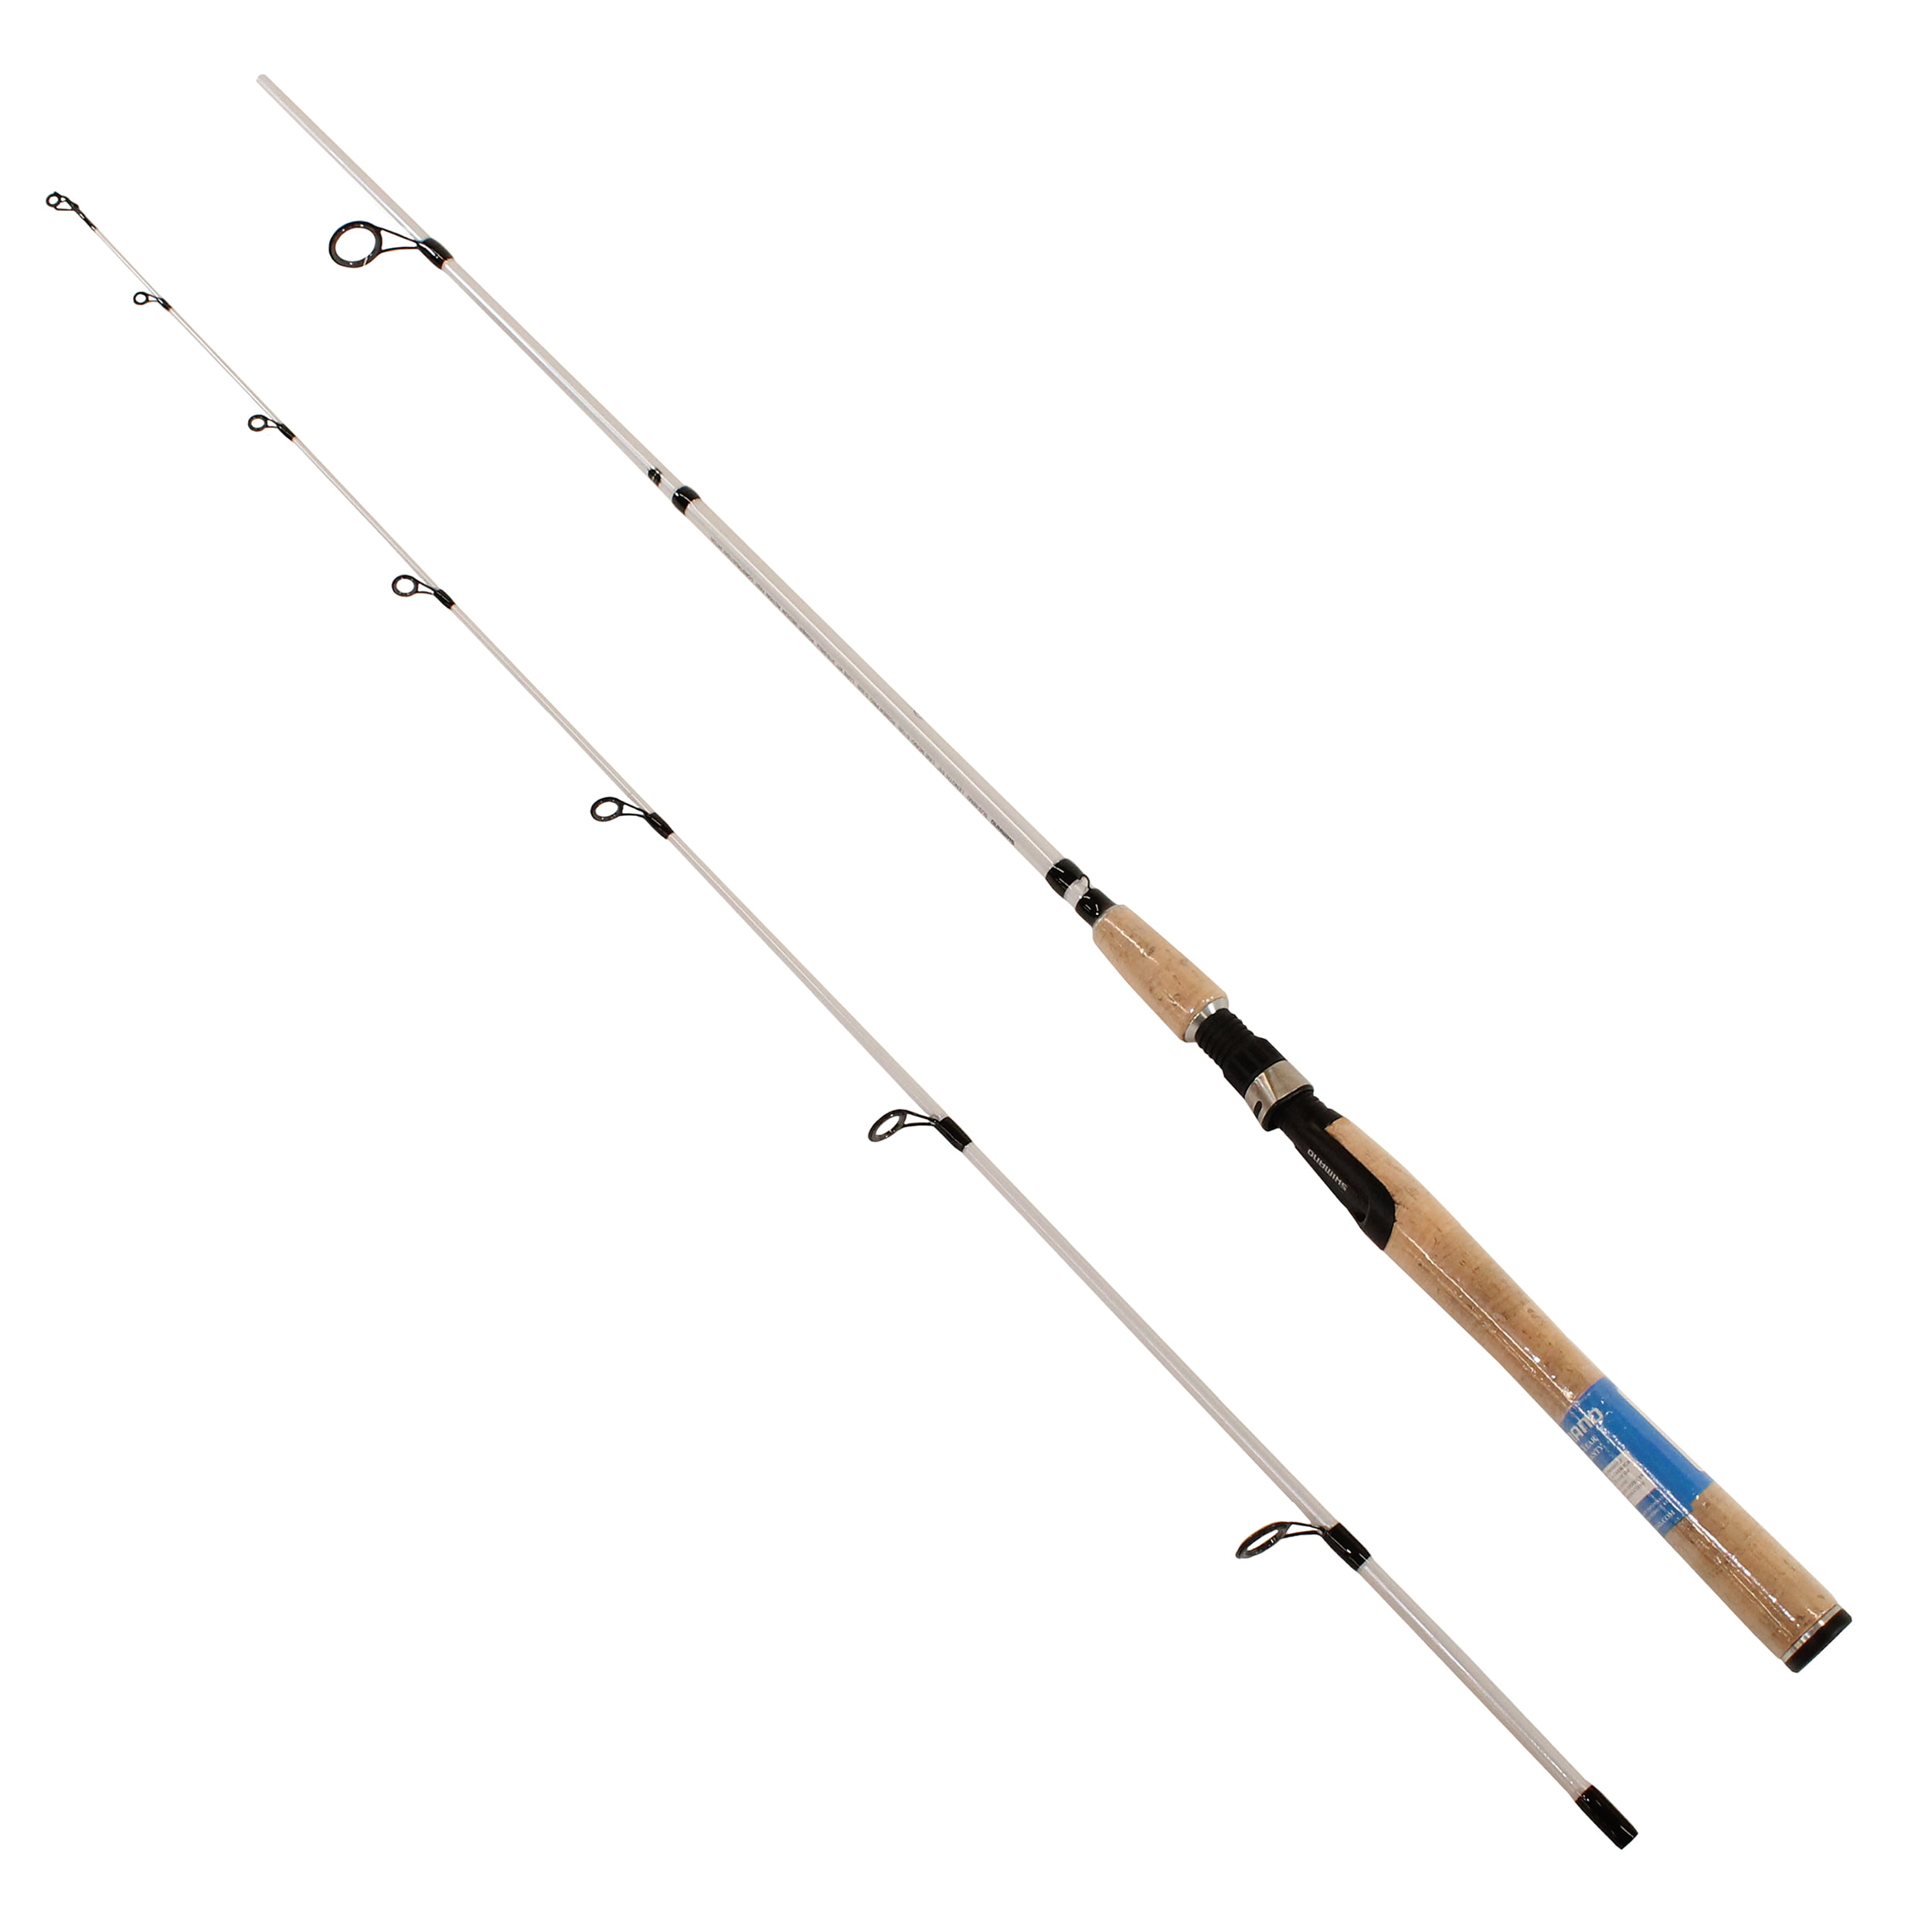 Shimano Sellus Spinning Rod 6' Length, 2pc, 3-10 lb Line Rate, 1